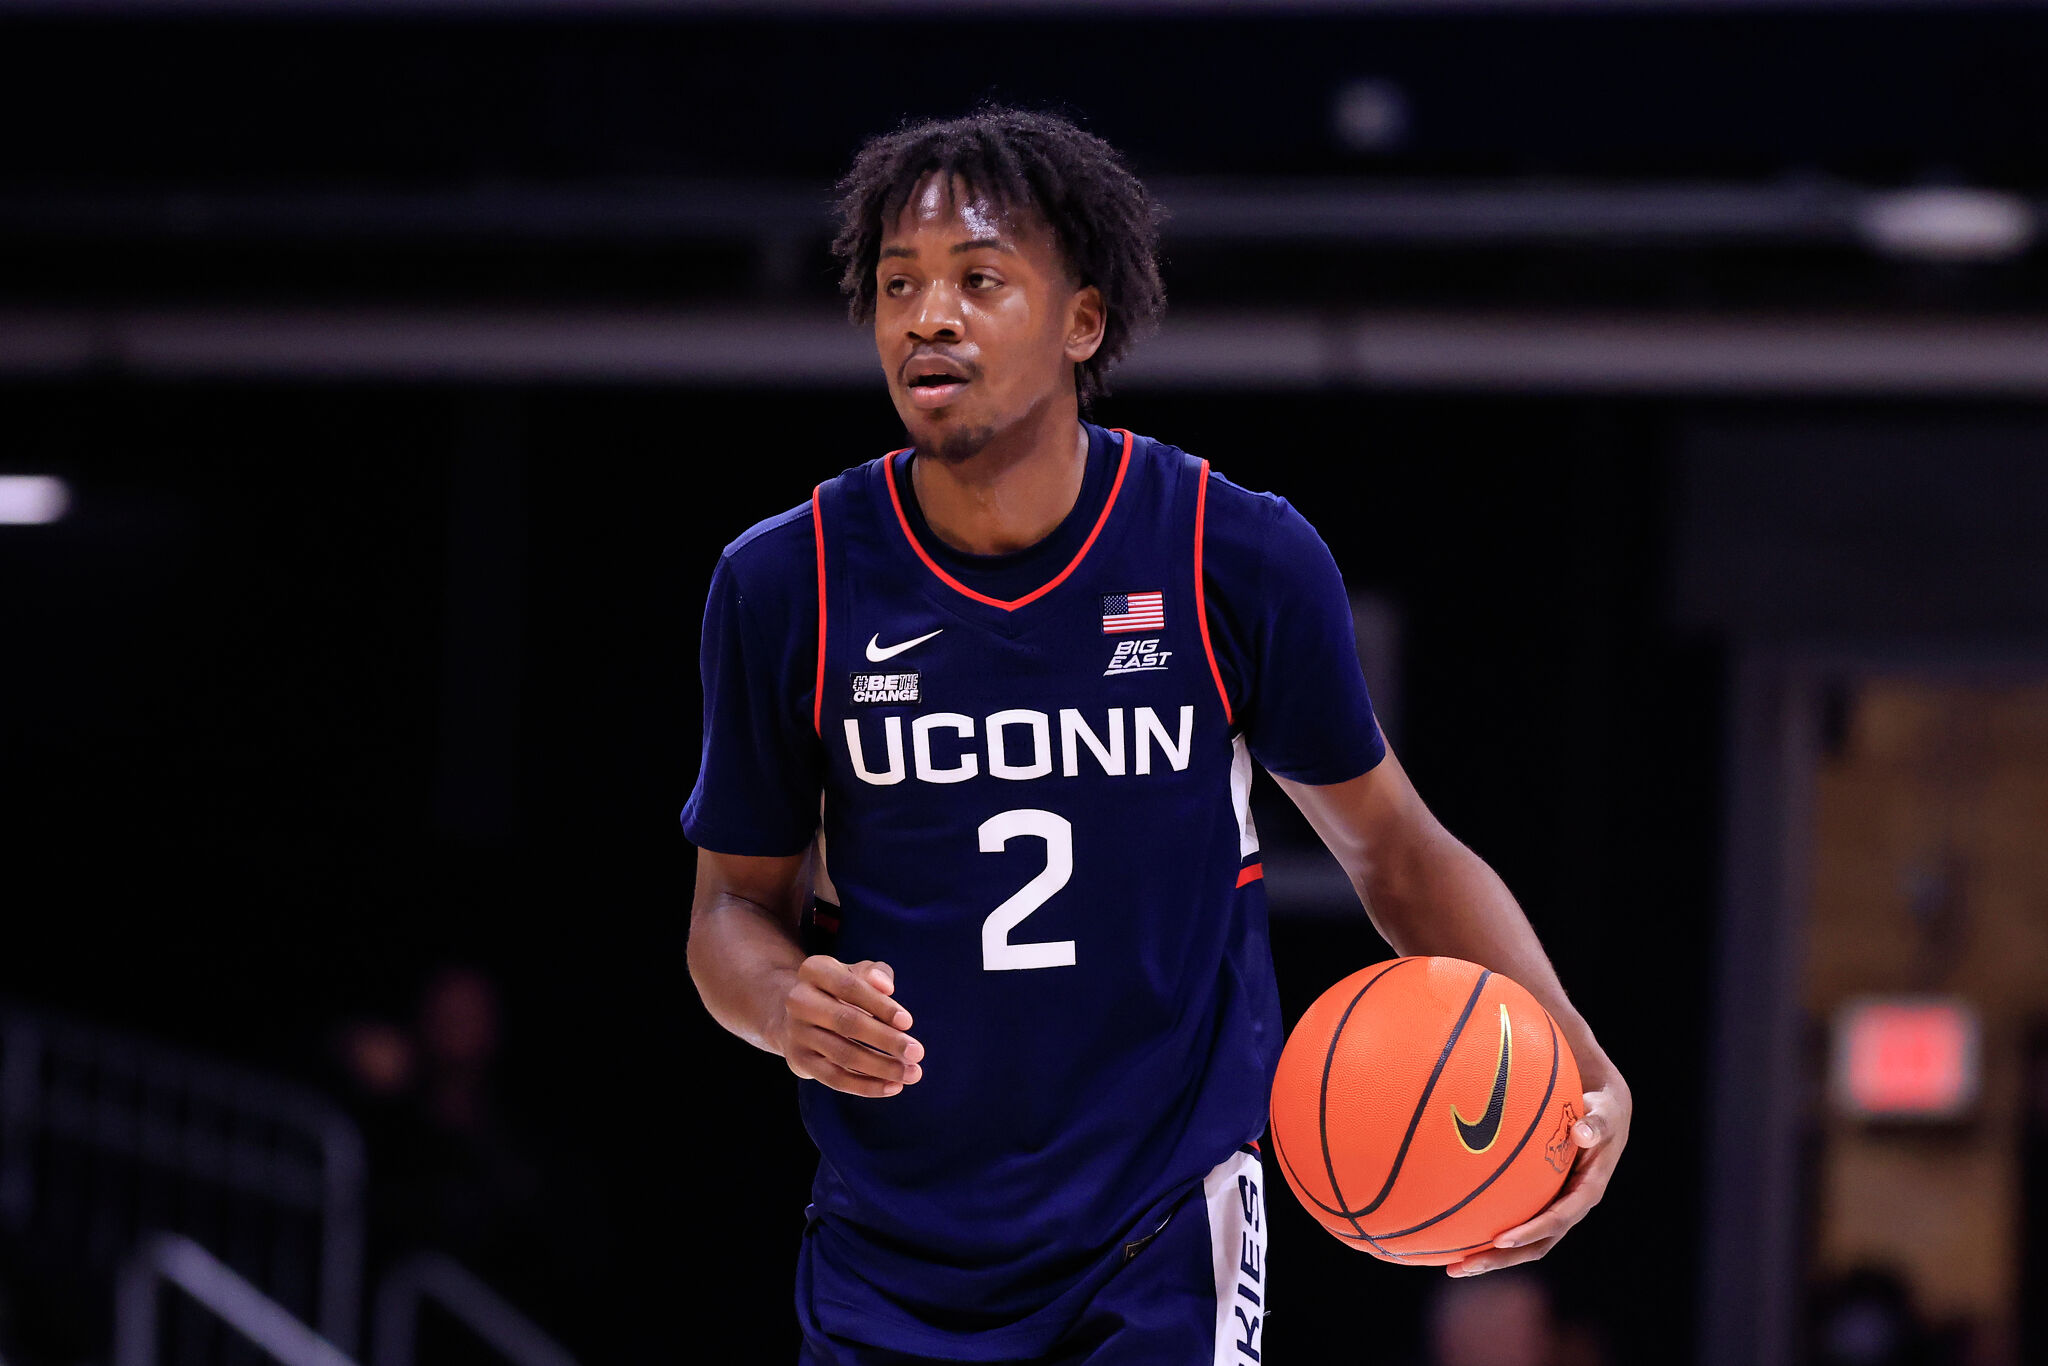 UConn men's basketball team remains No. 2 in AP Top 25 poll TrendRadars